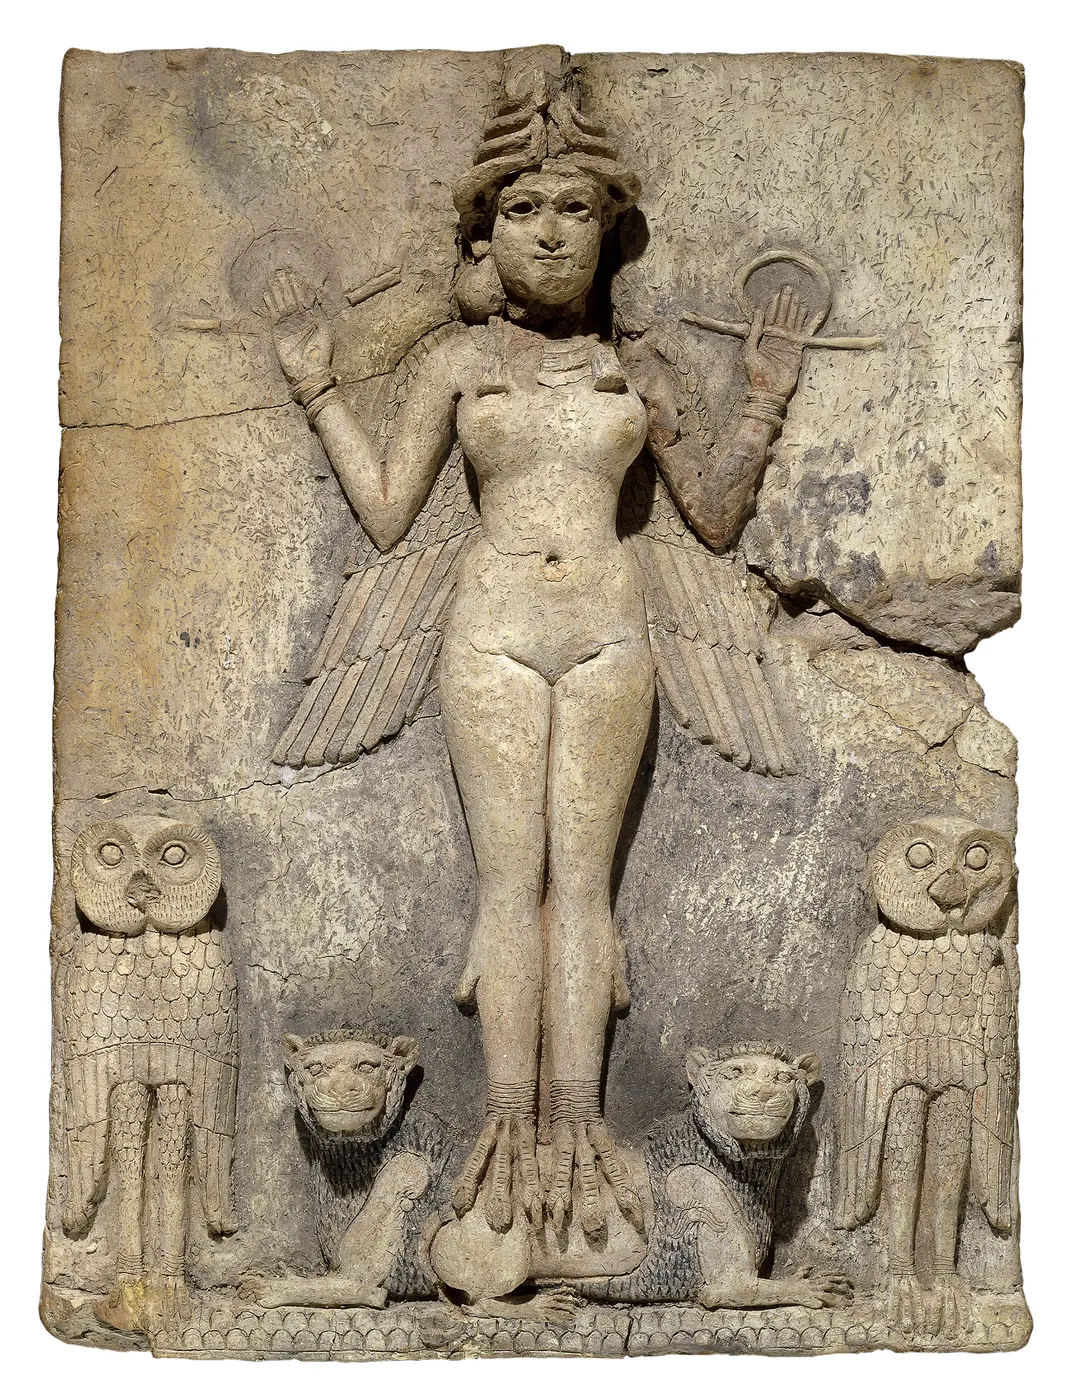 A clay relief of Mesopotamian goddess Ishtar, goddess of both sex and war.